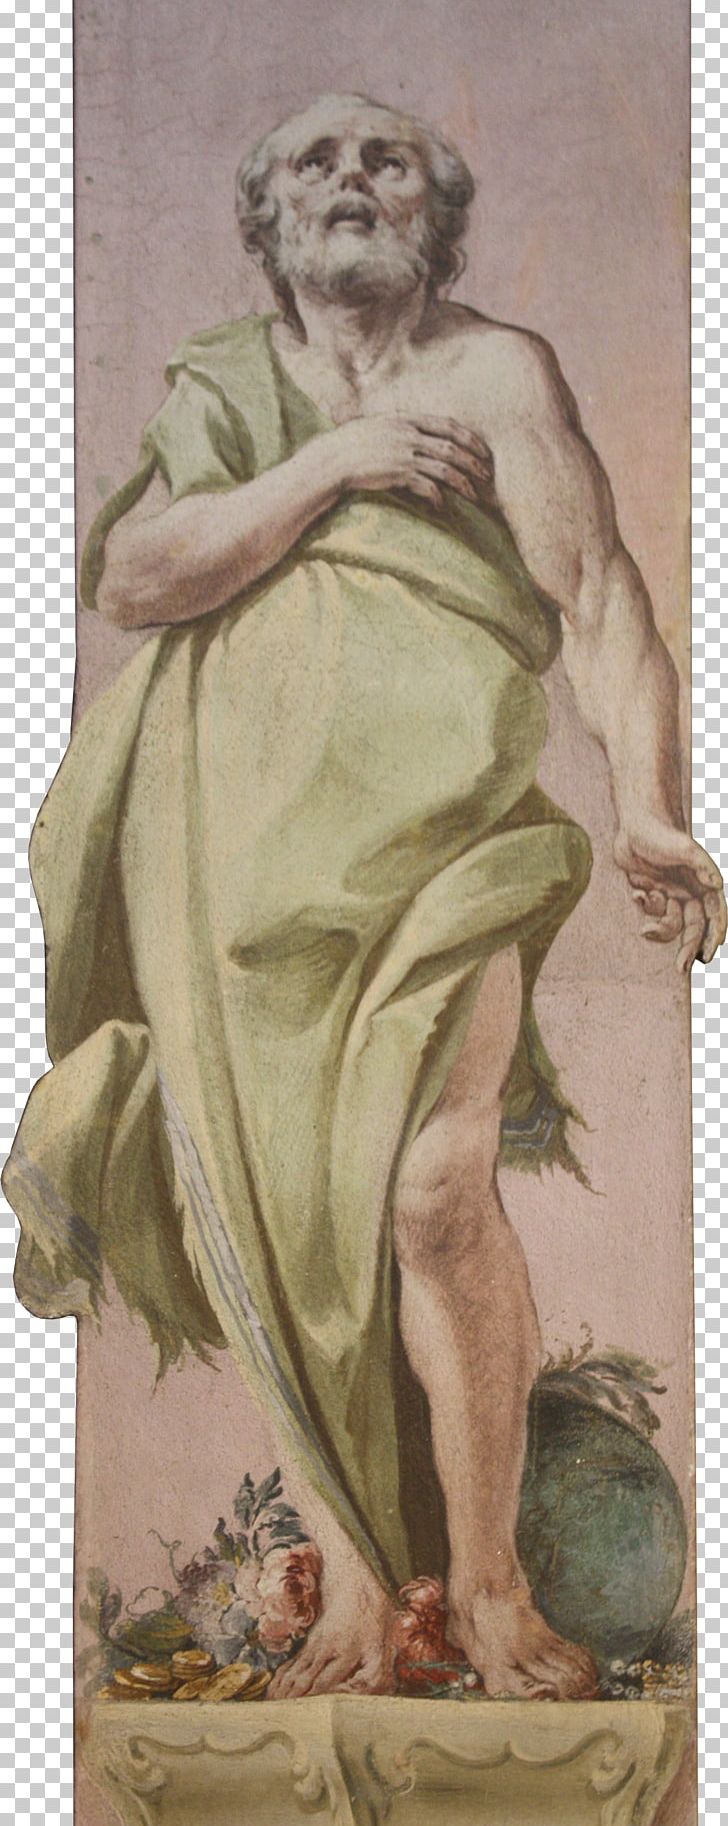 Painting Mythology Classical Sculpture PNG, Clipart, Art, Artwork, Classical Sculpture, Mythology, Painting Free PNG Download